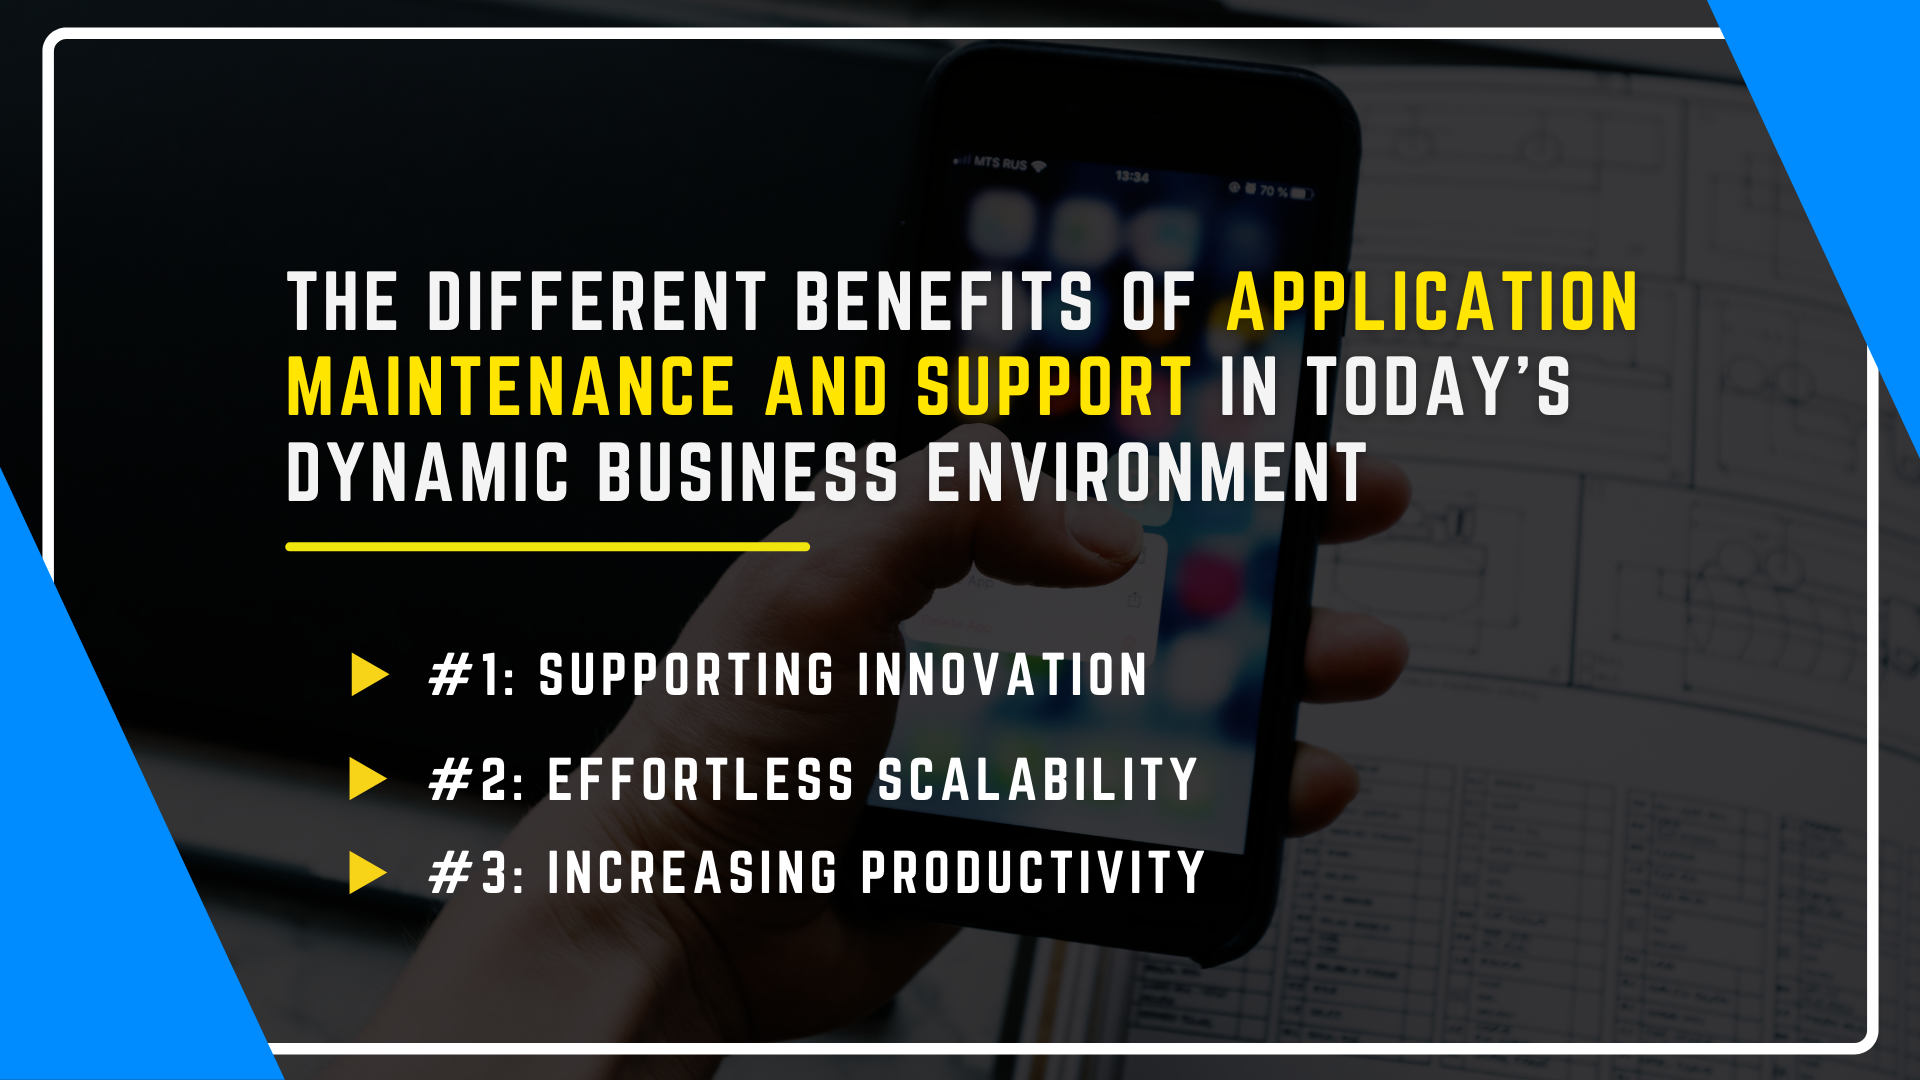 The Different Benefits Of Application Maintenance And Support In Today’s Dynamic Business Environment